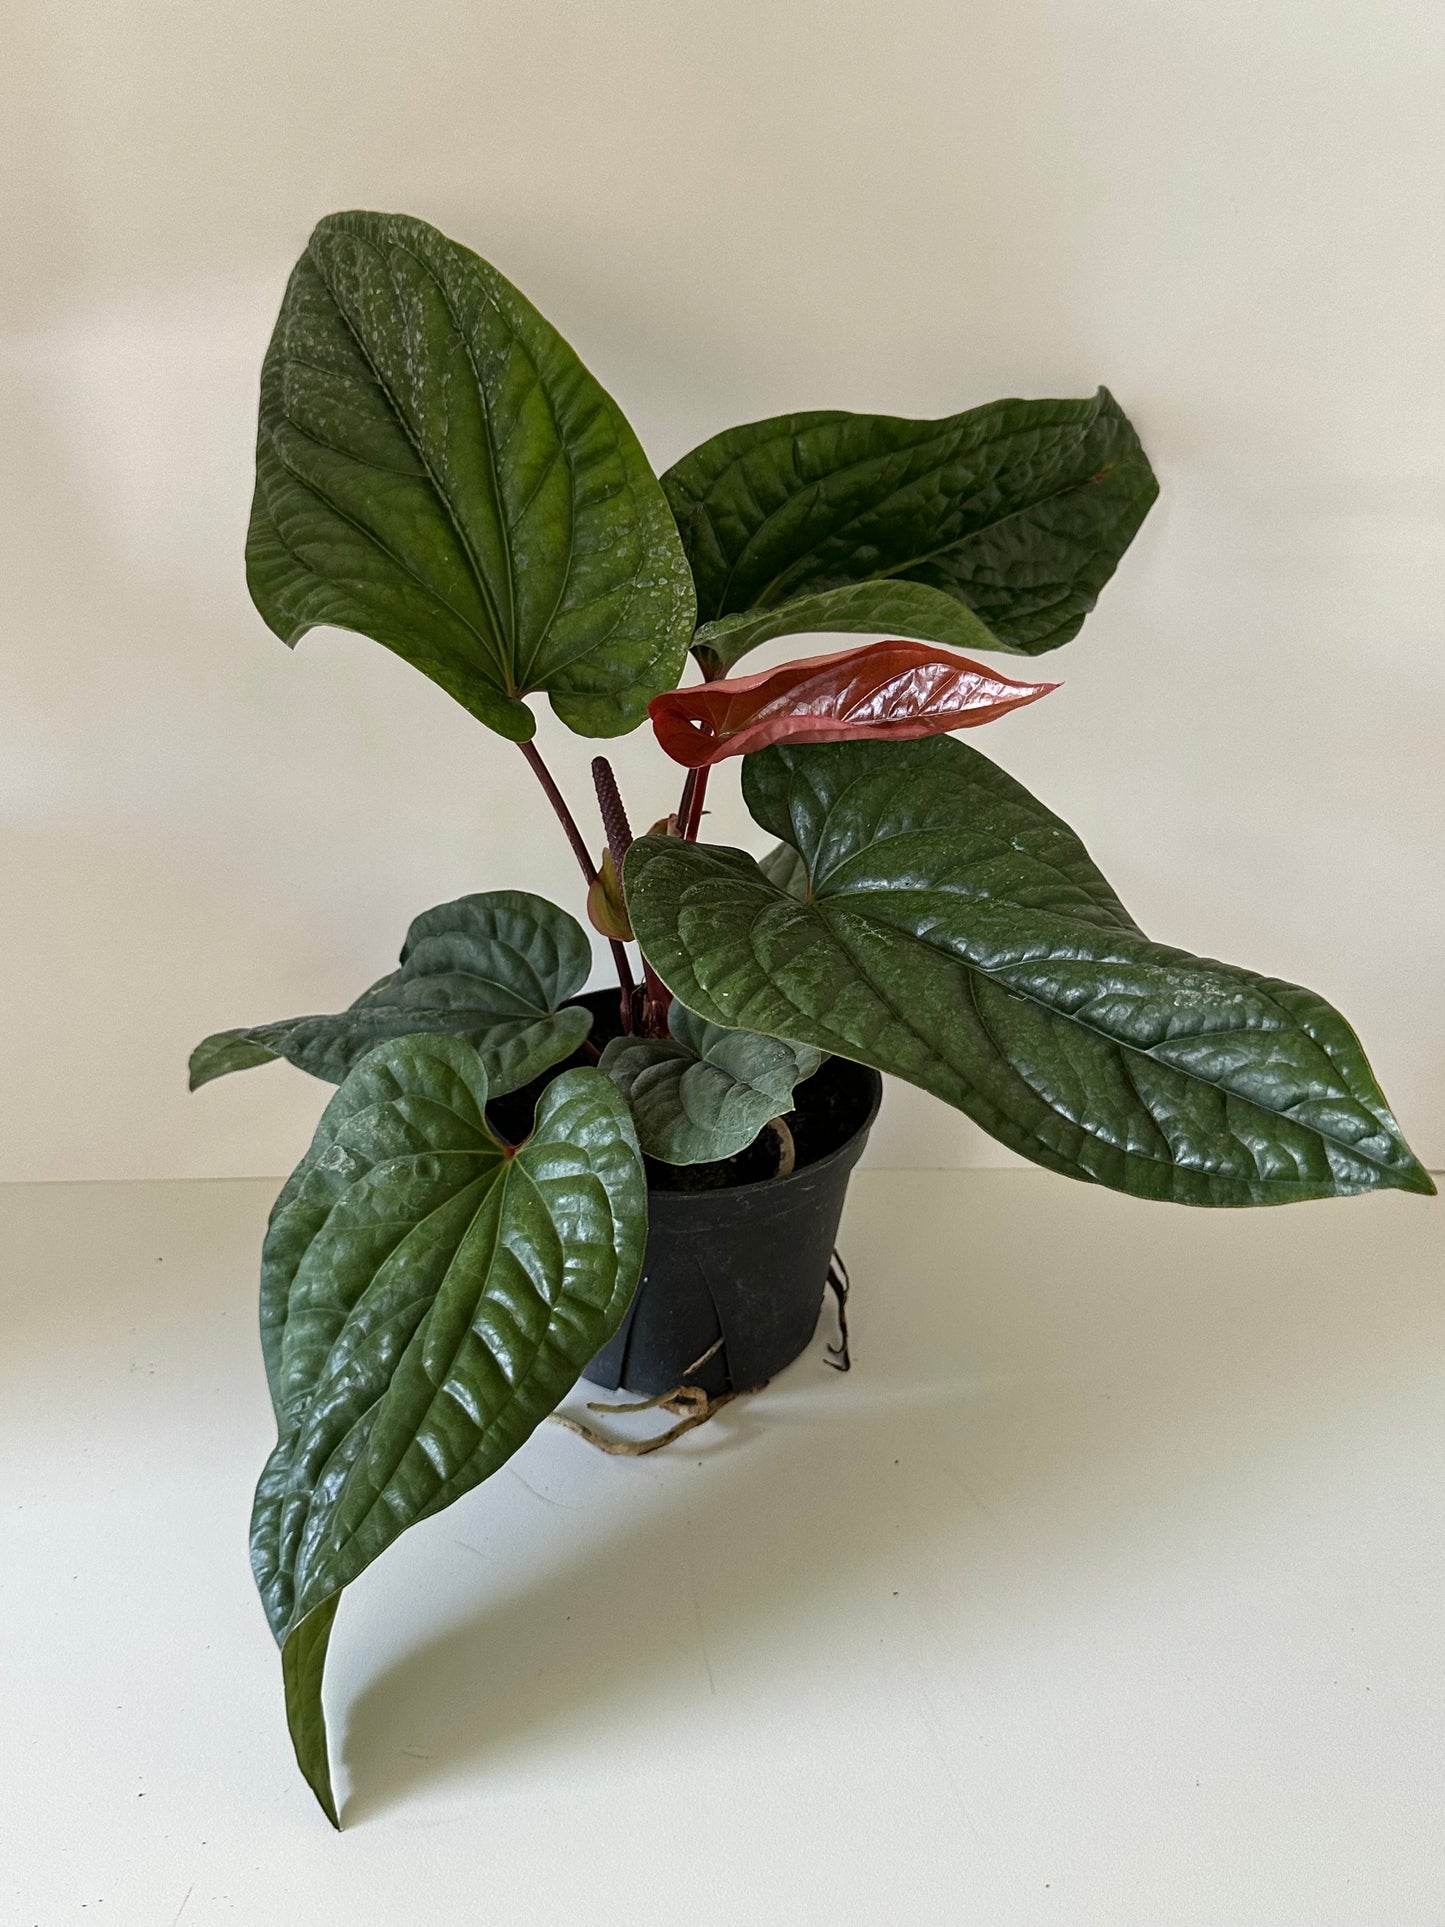 Anthurium 'Radicans x Luxurians'- Thick, Colorful, Glossy, Hardy Leaves, Loves Humidity- Tropical Houseplant- (4 Inch Or 6 Inch Nursery Pot)